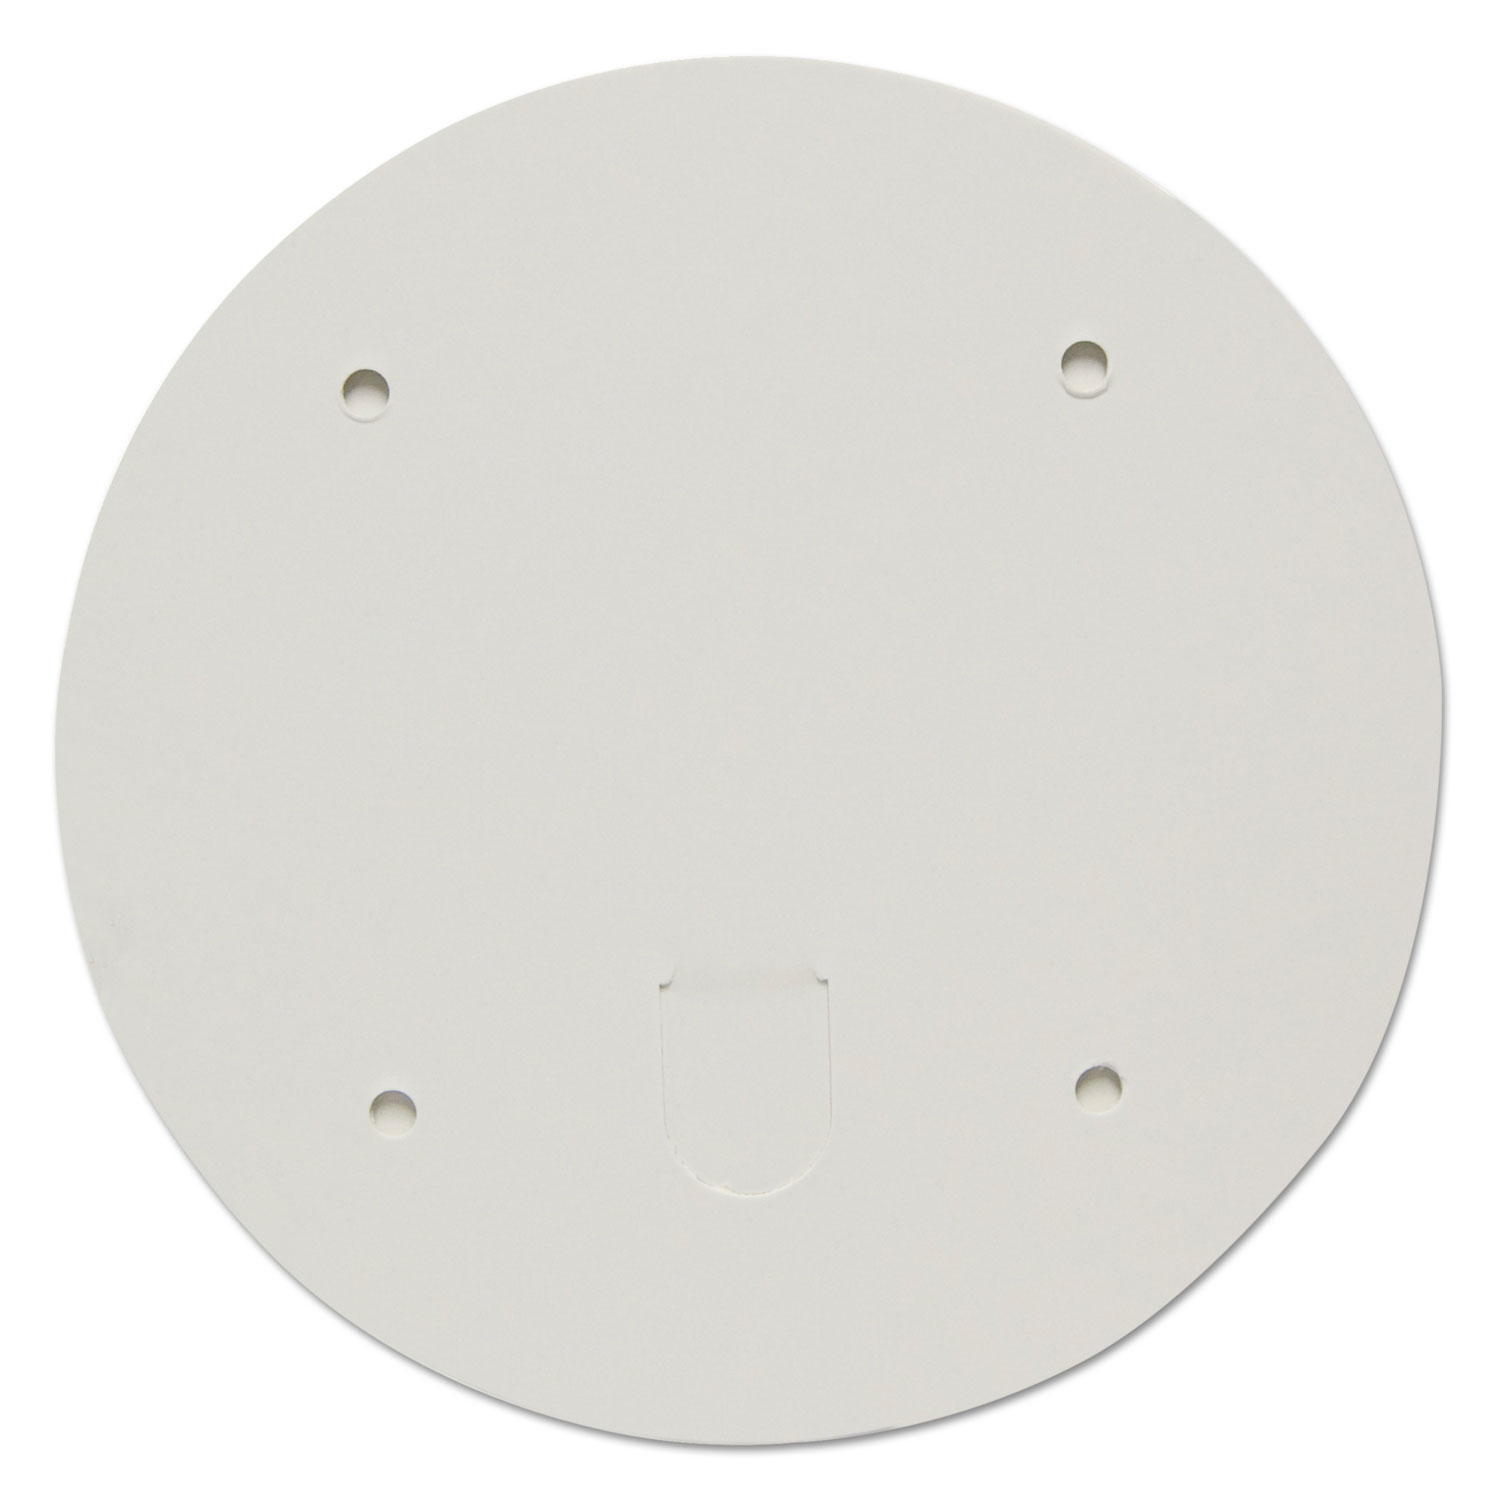  Dart 5VT19S-N1125 Paper Lids for 83oz Food Containers, White, Vented, 7.2 Dia, 100/Carton (SCC5VT19S) 